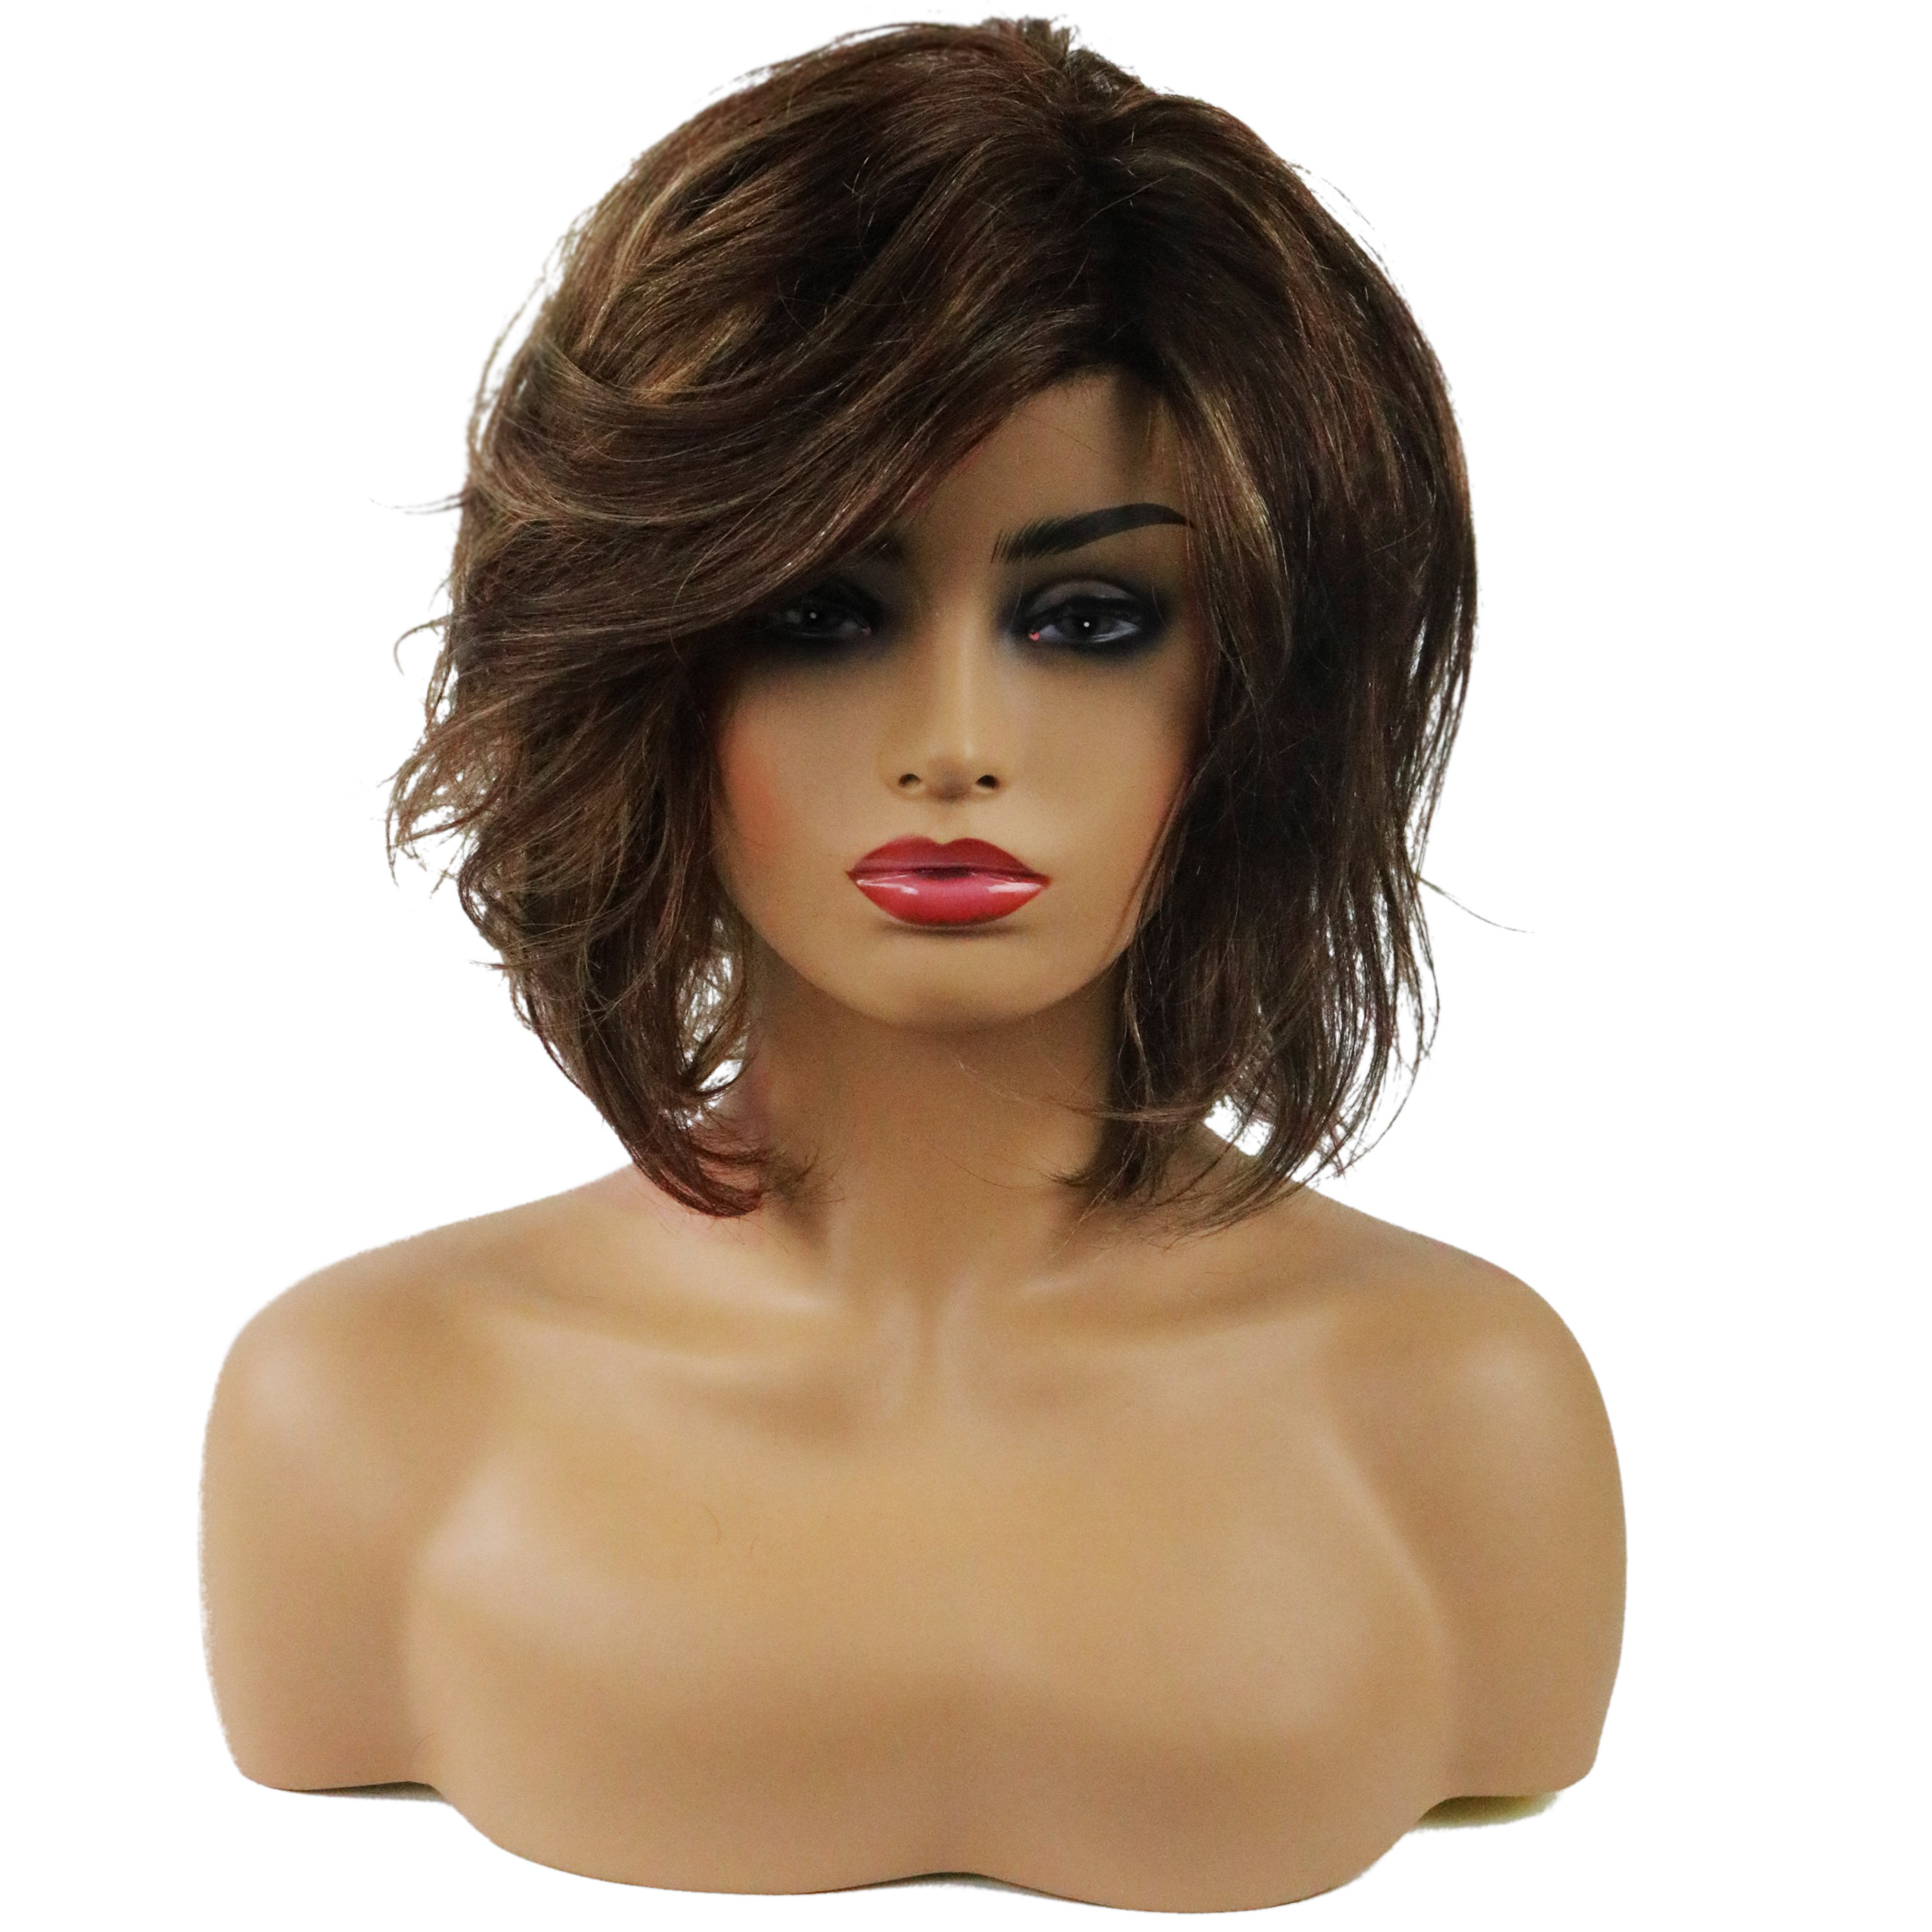 Hot Loose Wave Side Swept Human Hair Women Capless Wigs 10 Inches